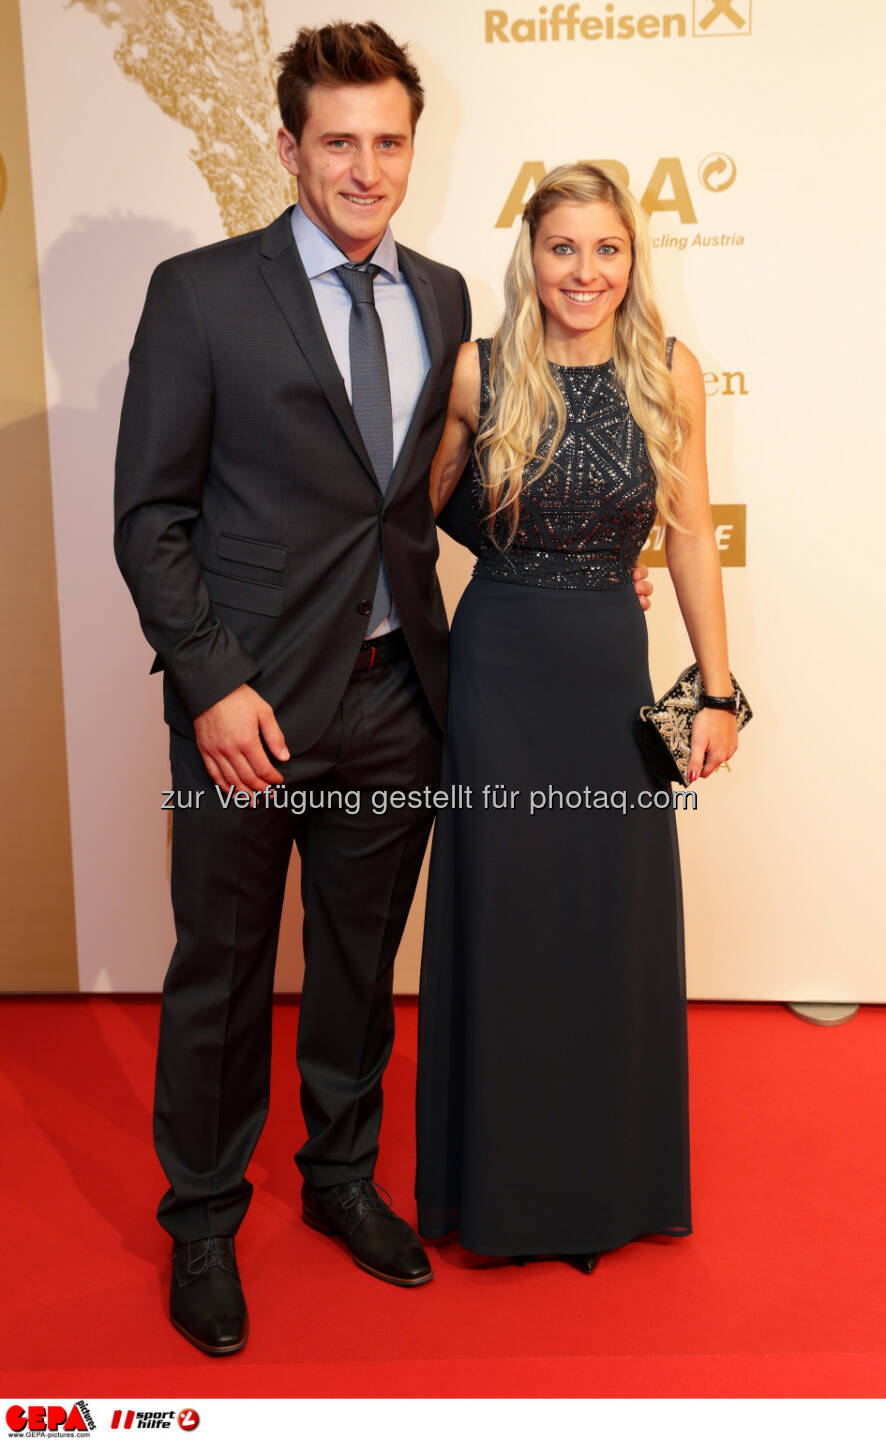 Matthias Mayer (AUT) and his girlfriend Photo: GEPA pictures/ Walter Luger